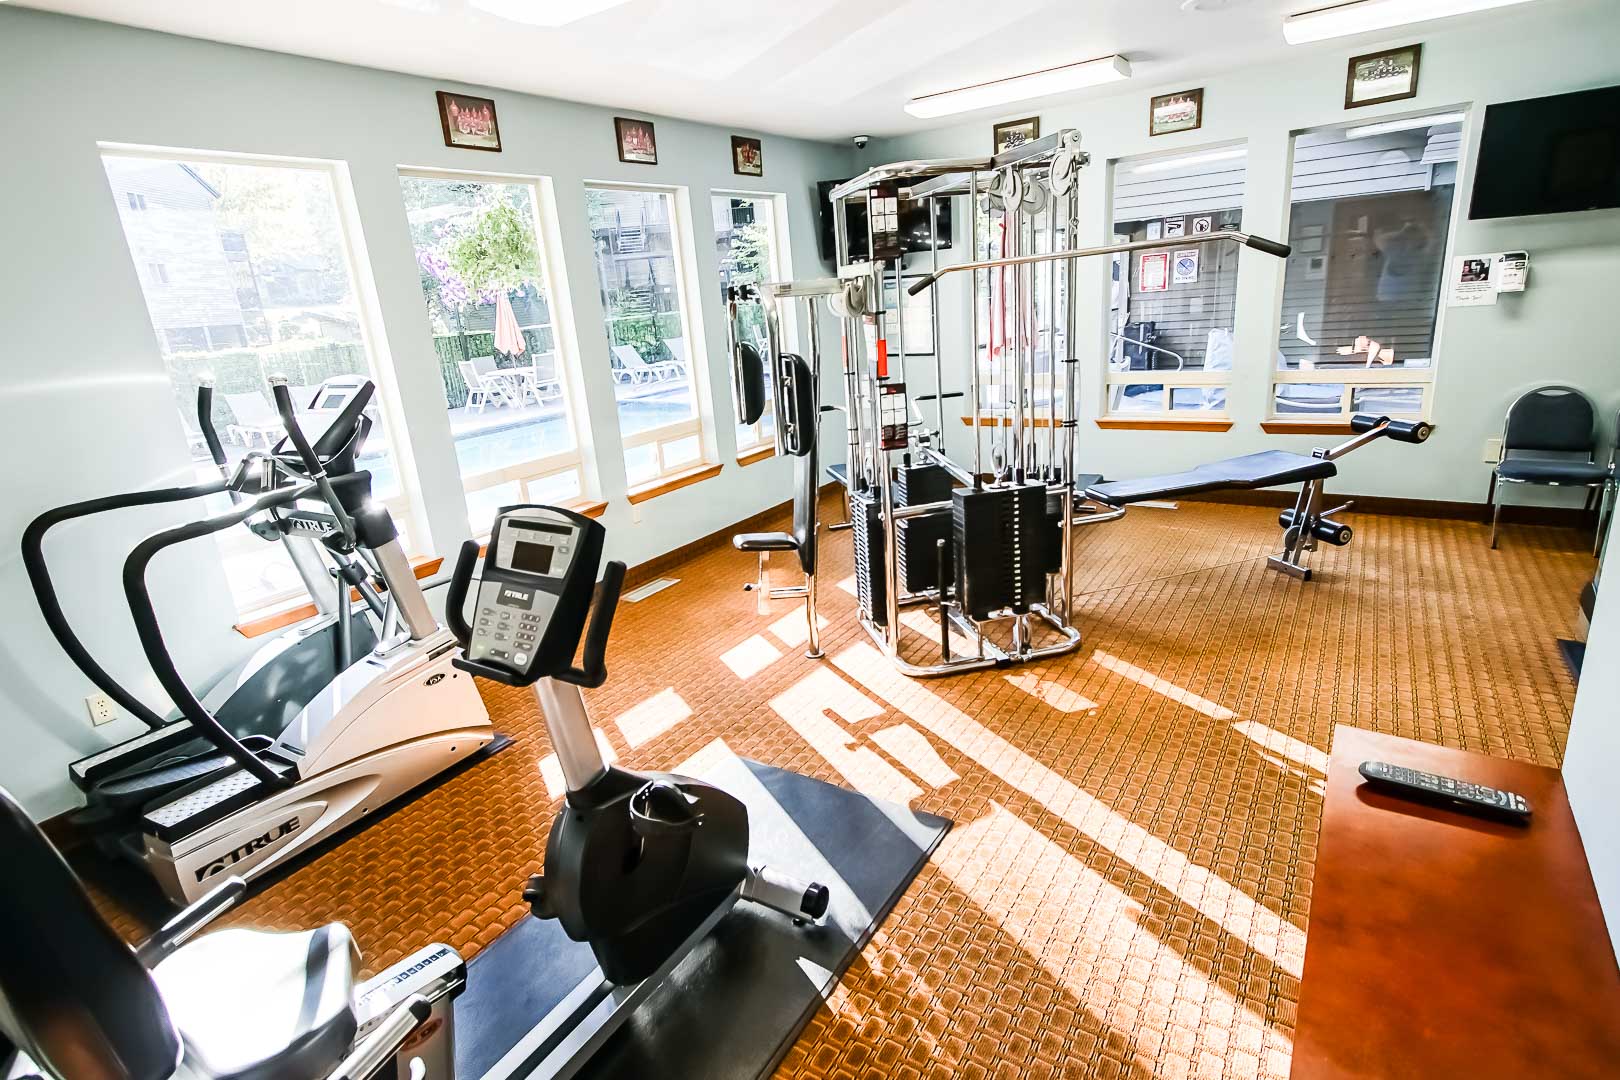 A spacious exercise room at VRI's Whispering Woods Resort in Oregon.